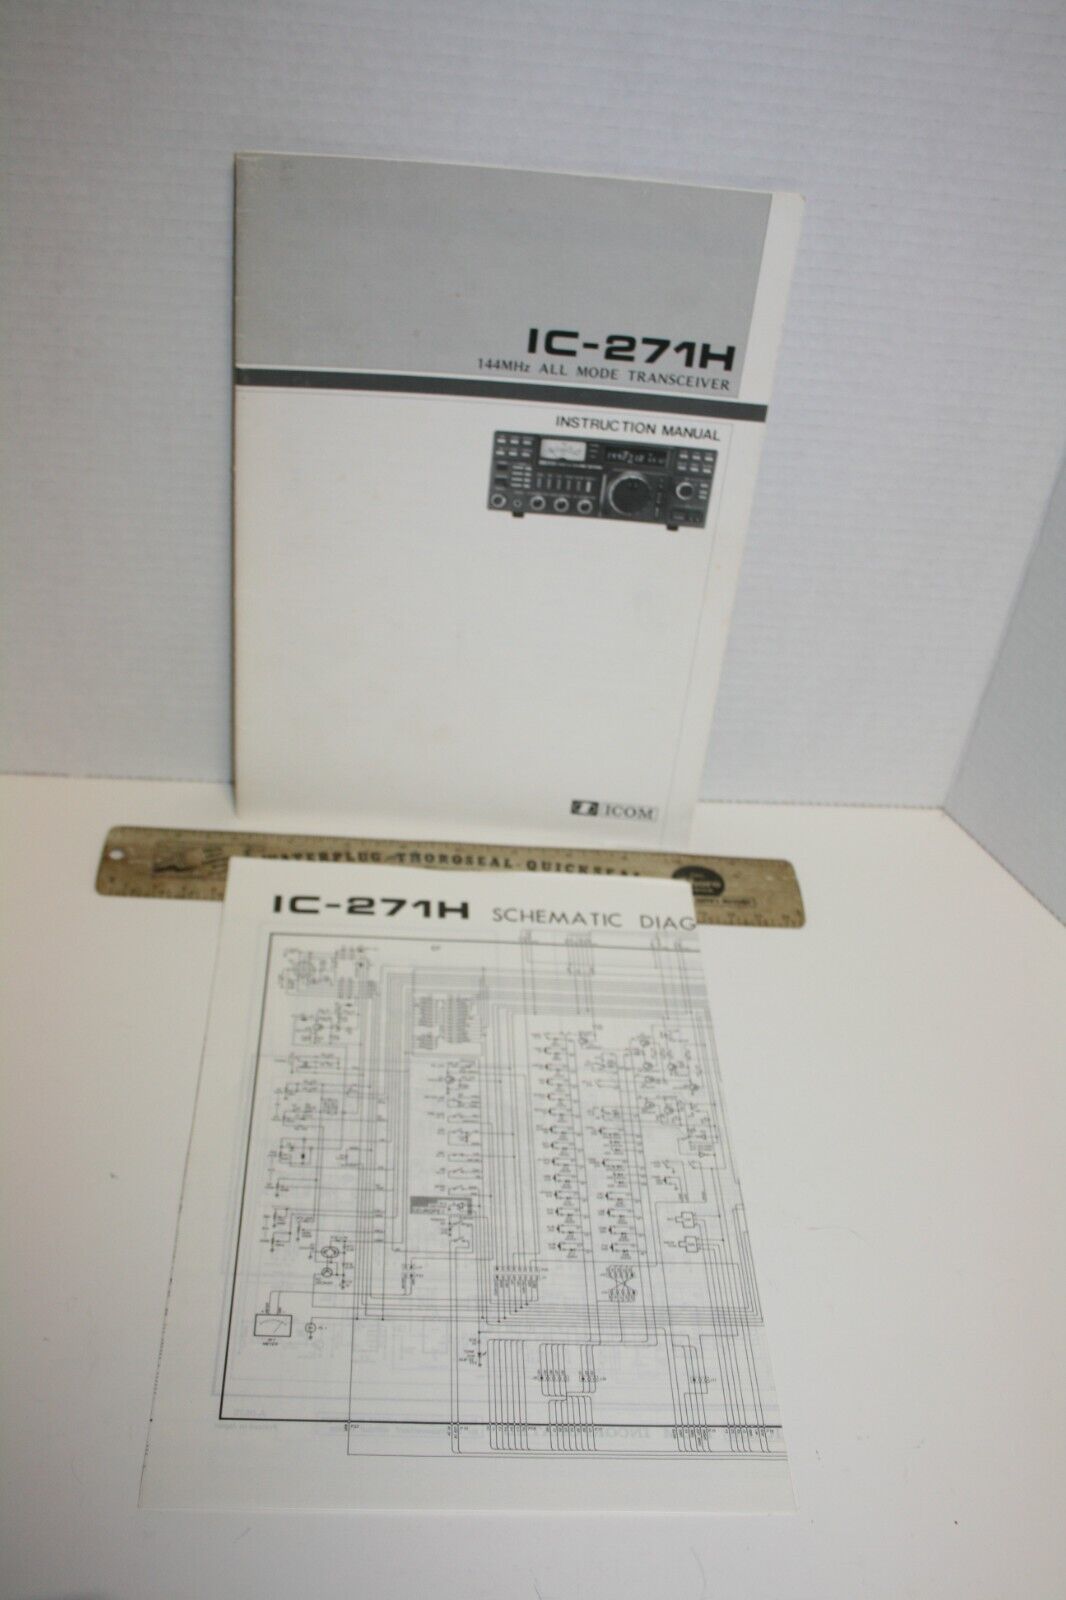 ICOM - IC-271H - INSTRUCTION MANUAL - WITH SCHEMATIC 144MhZ ALL MODE TRANSCEIVER